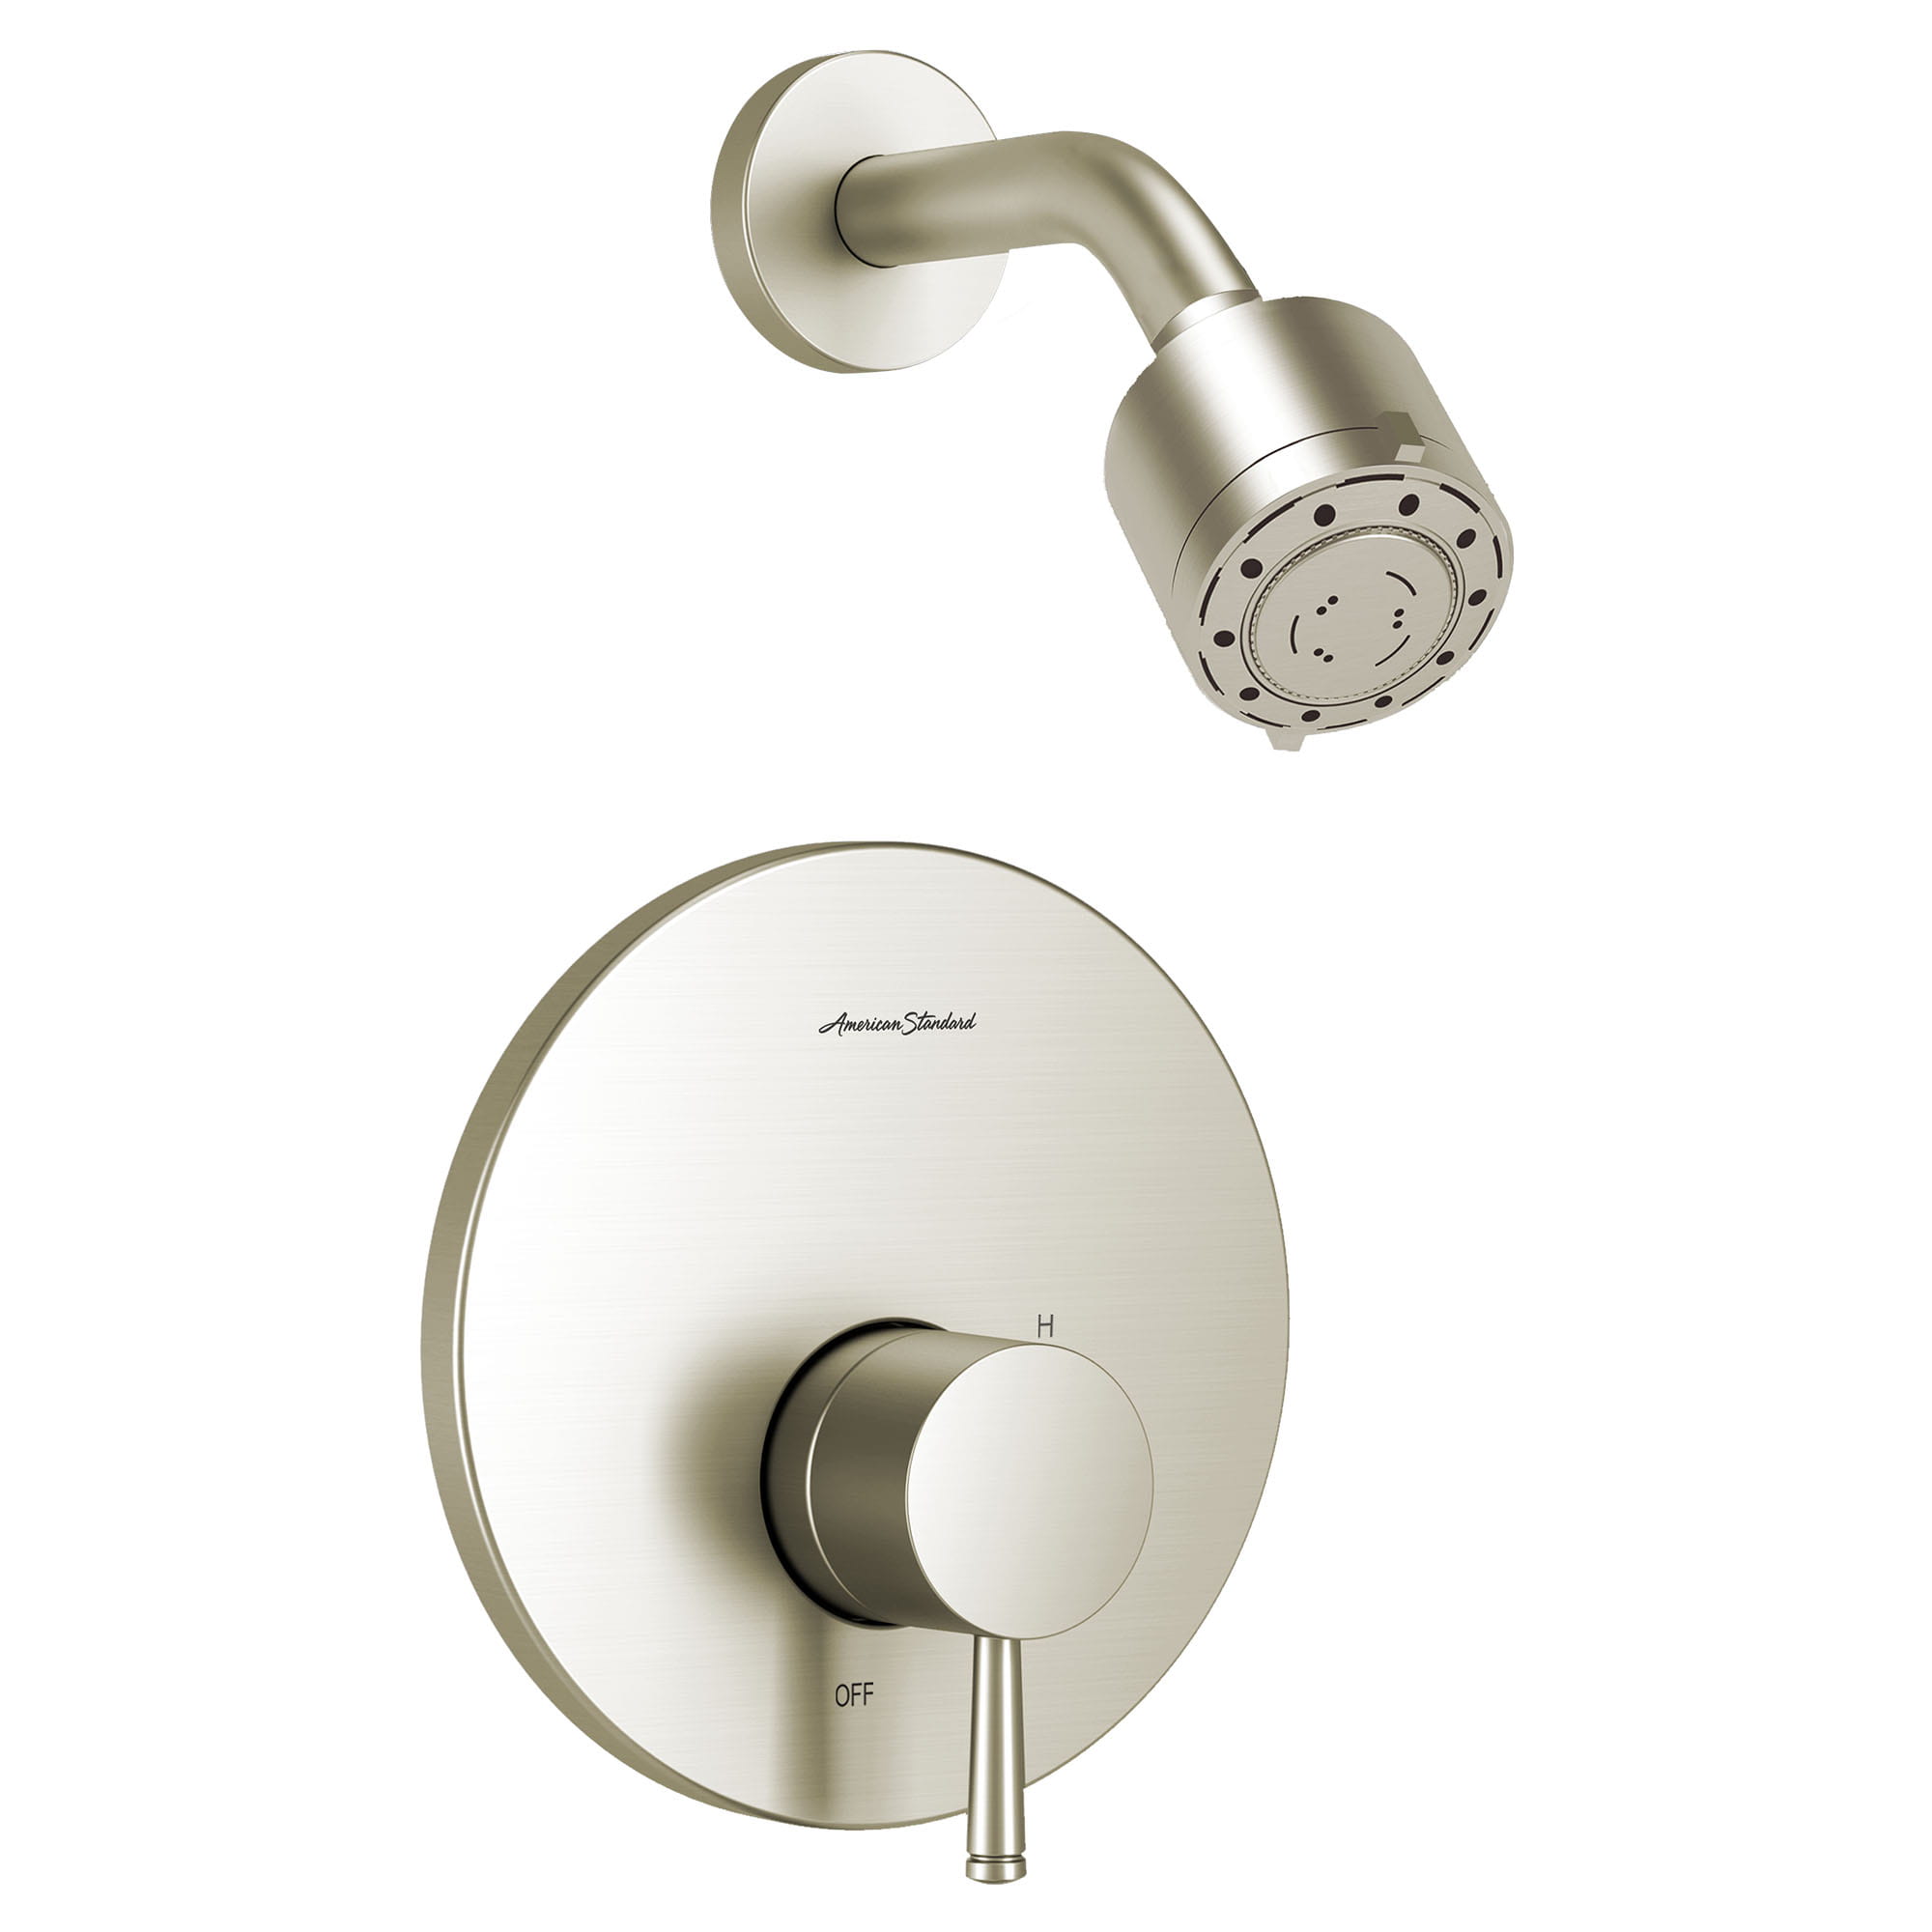 Serin 25 gpm 95 L min Shower Trim Kit With 3 Function Shower Head Double Ceramic Pressure Balance Cartridge With Lever Handle   BRUSHED NICKEL